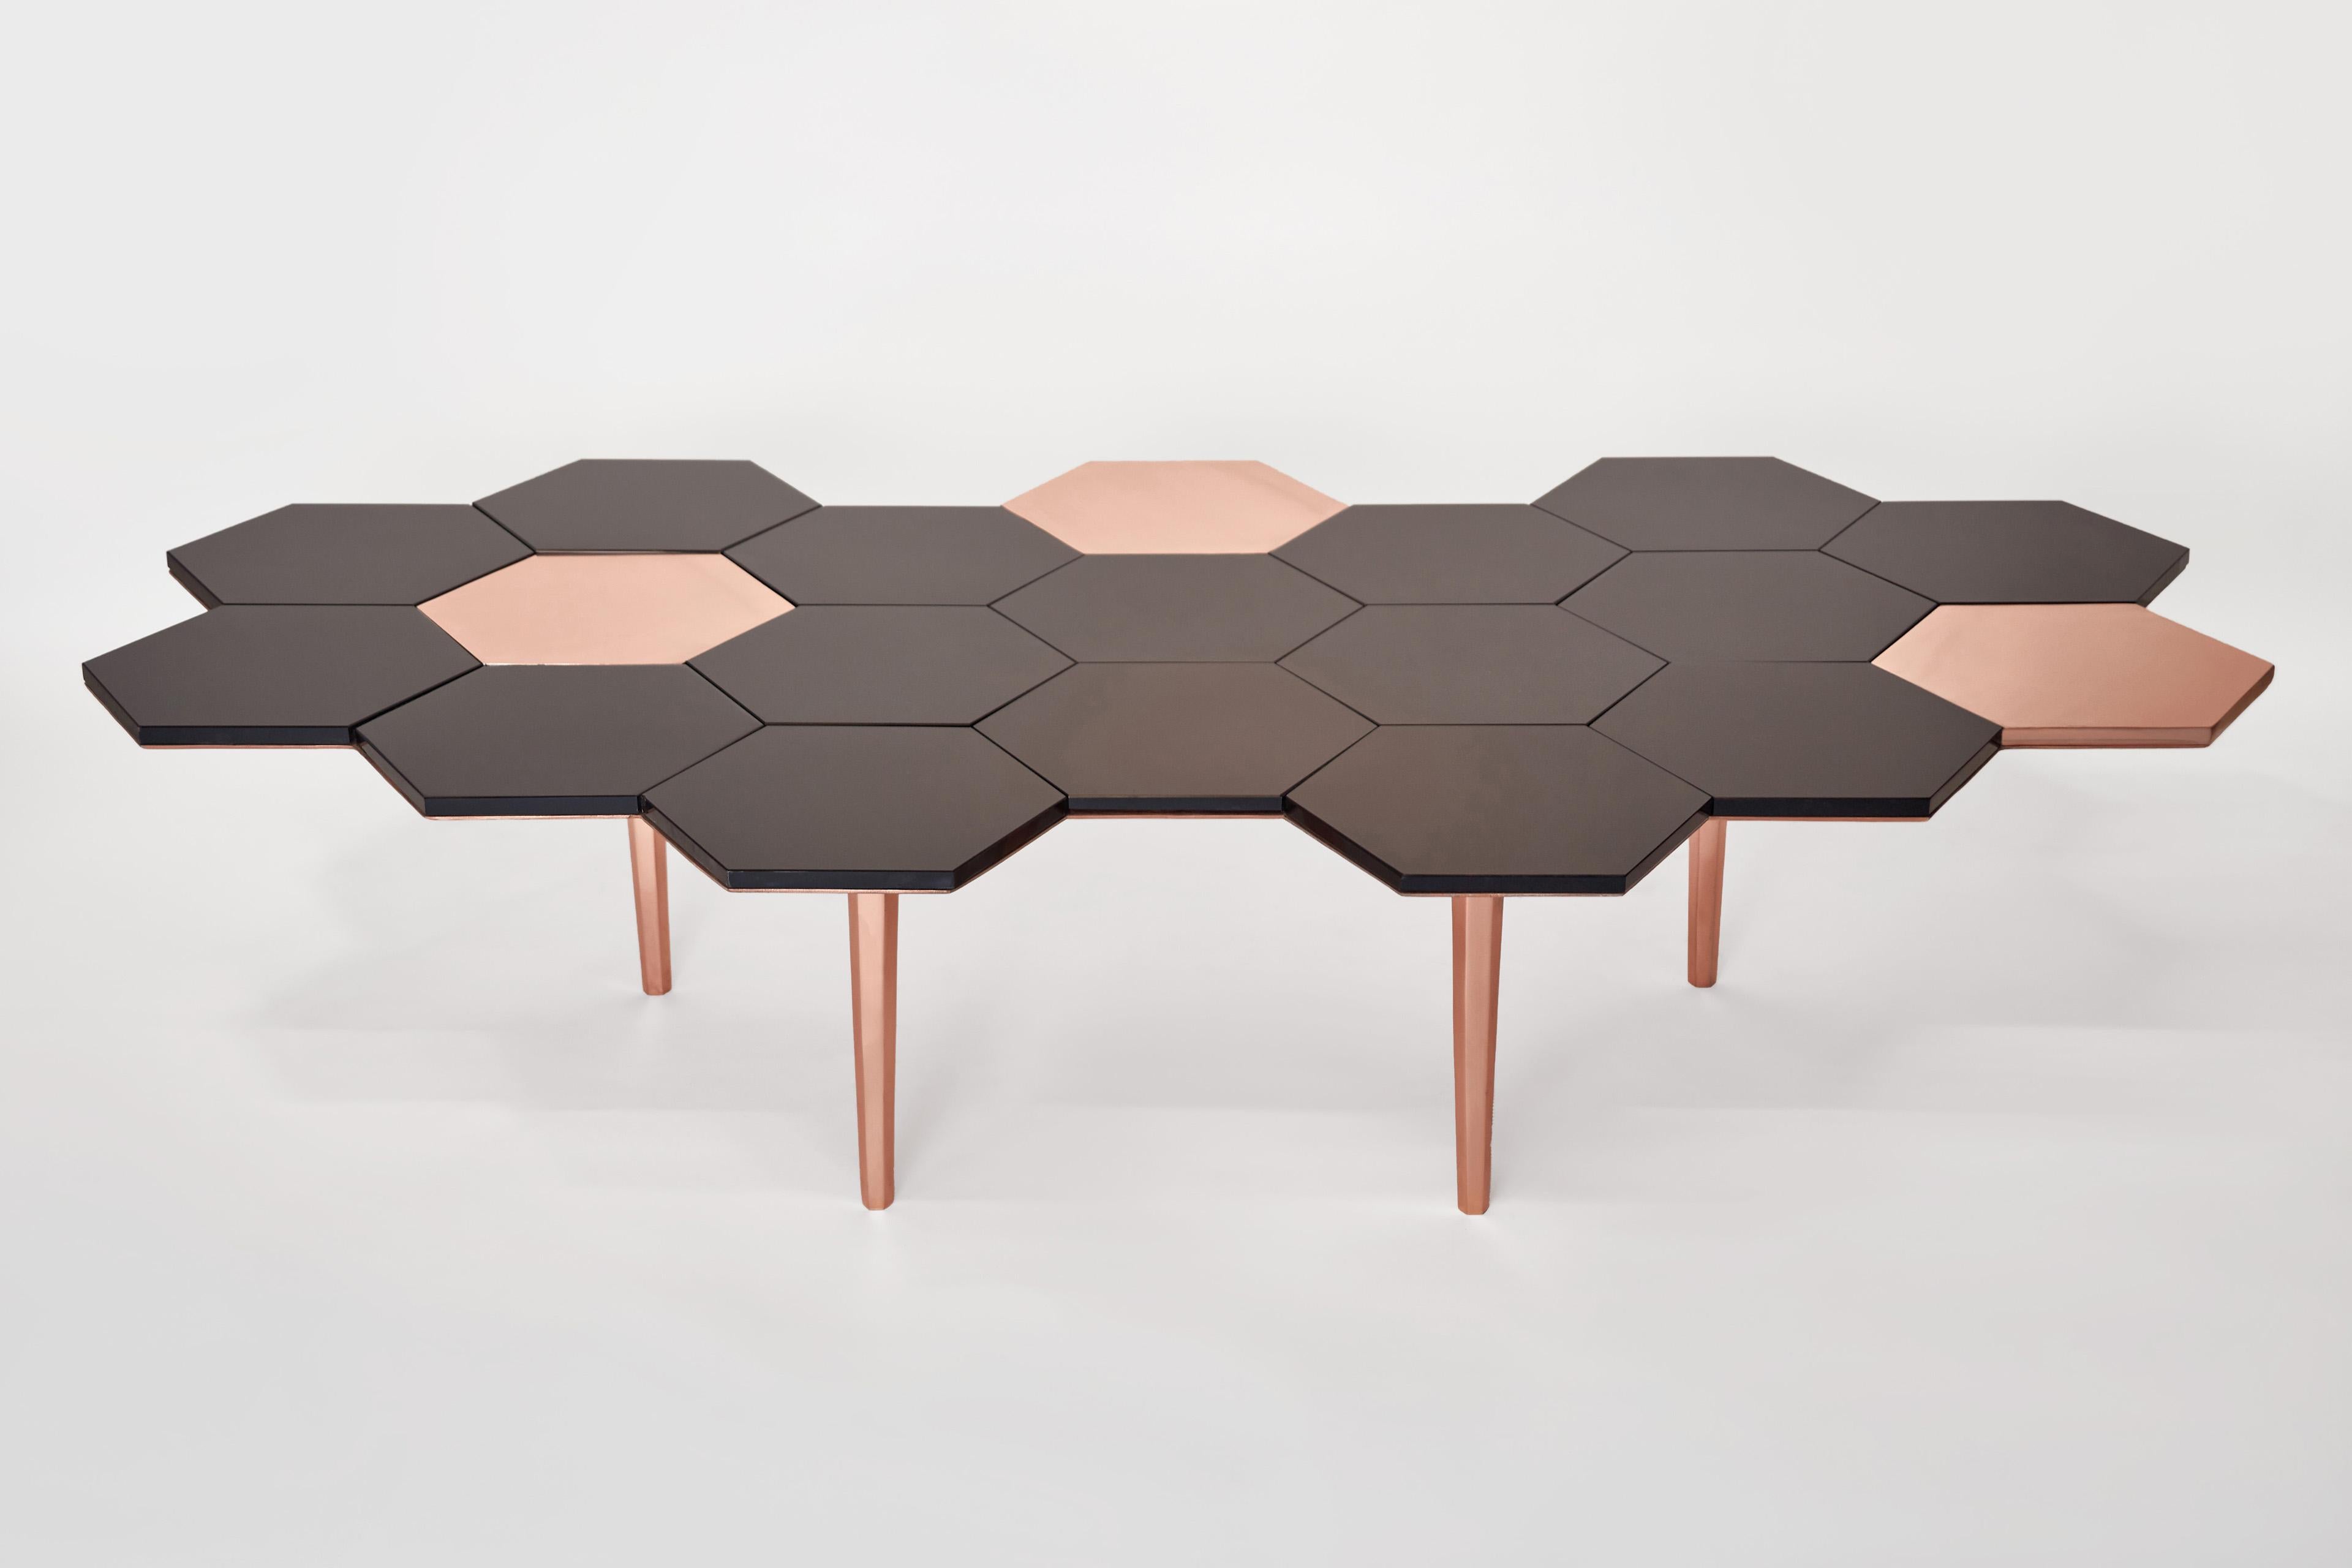 Mexican Honeycomb Coffee Table by Sten Studio, Represented by Tuleste Factory